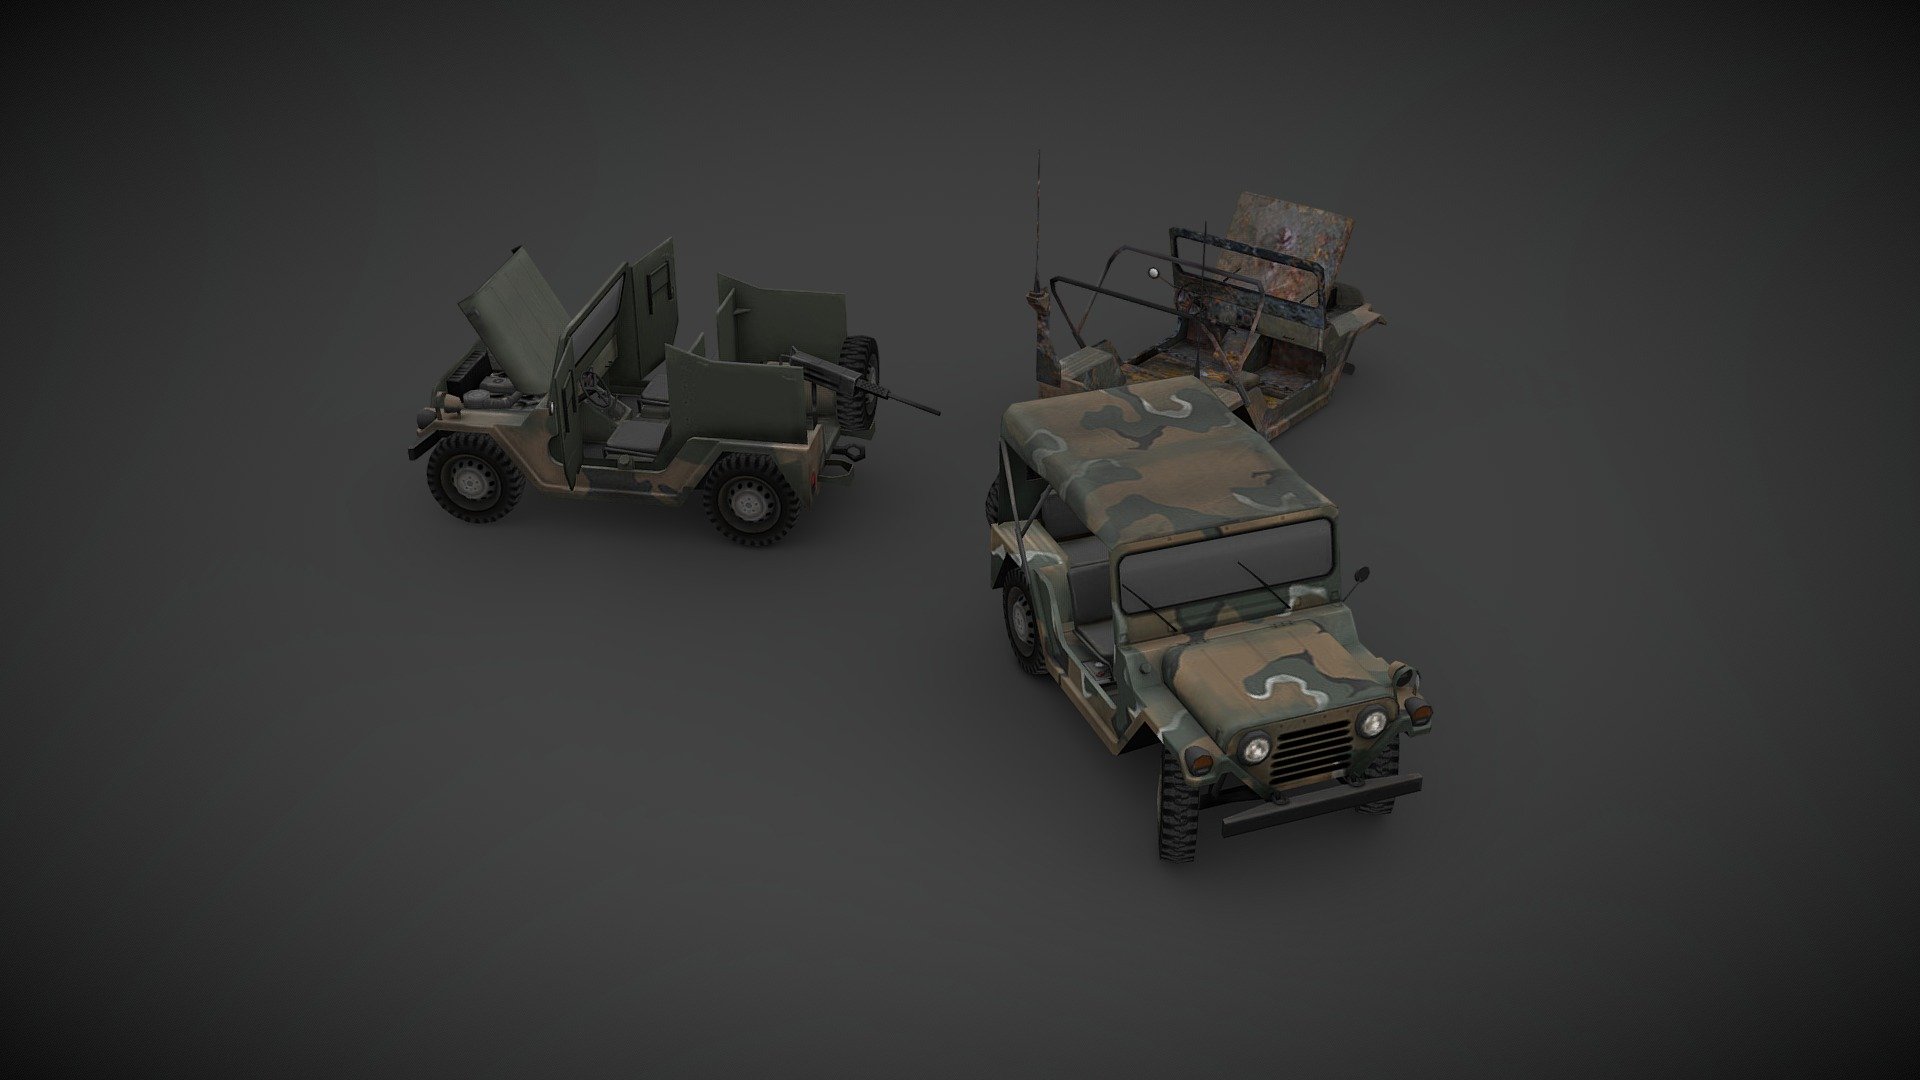 Showcase of the 1974 AM General M151A2 Military Utility Tactical Truck, I’ve made for project ZOMBOID, low poly but with a high detail texture, optimized for game engine. This version is not a 100% true to the original since there are some compromises I’ve had to make to present it here.

You can find the actual version in project ZOMBOID STEAM Workshop 3d model